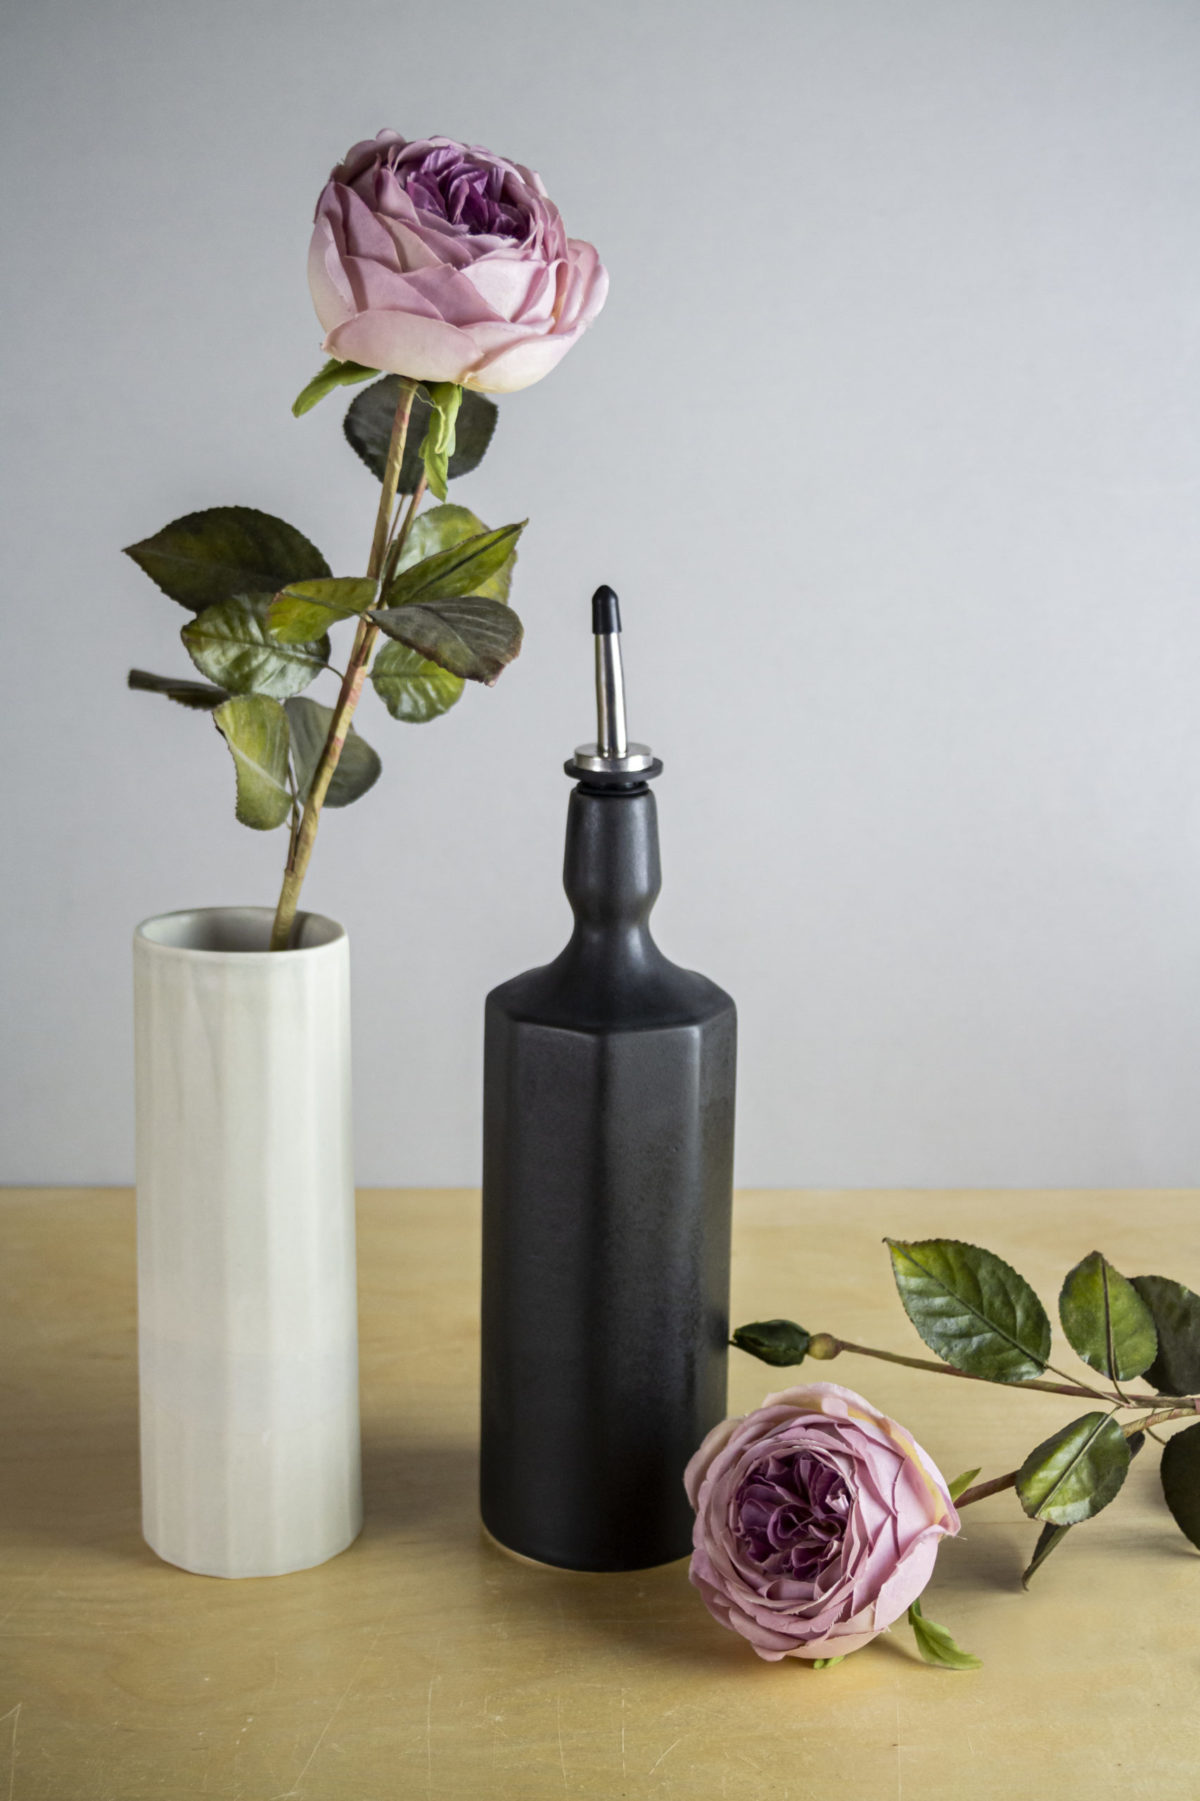 An oil bottle next to flowers